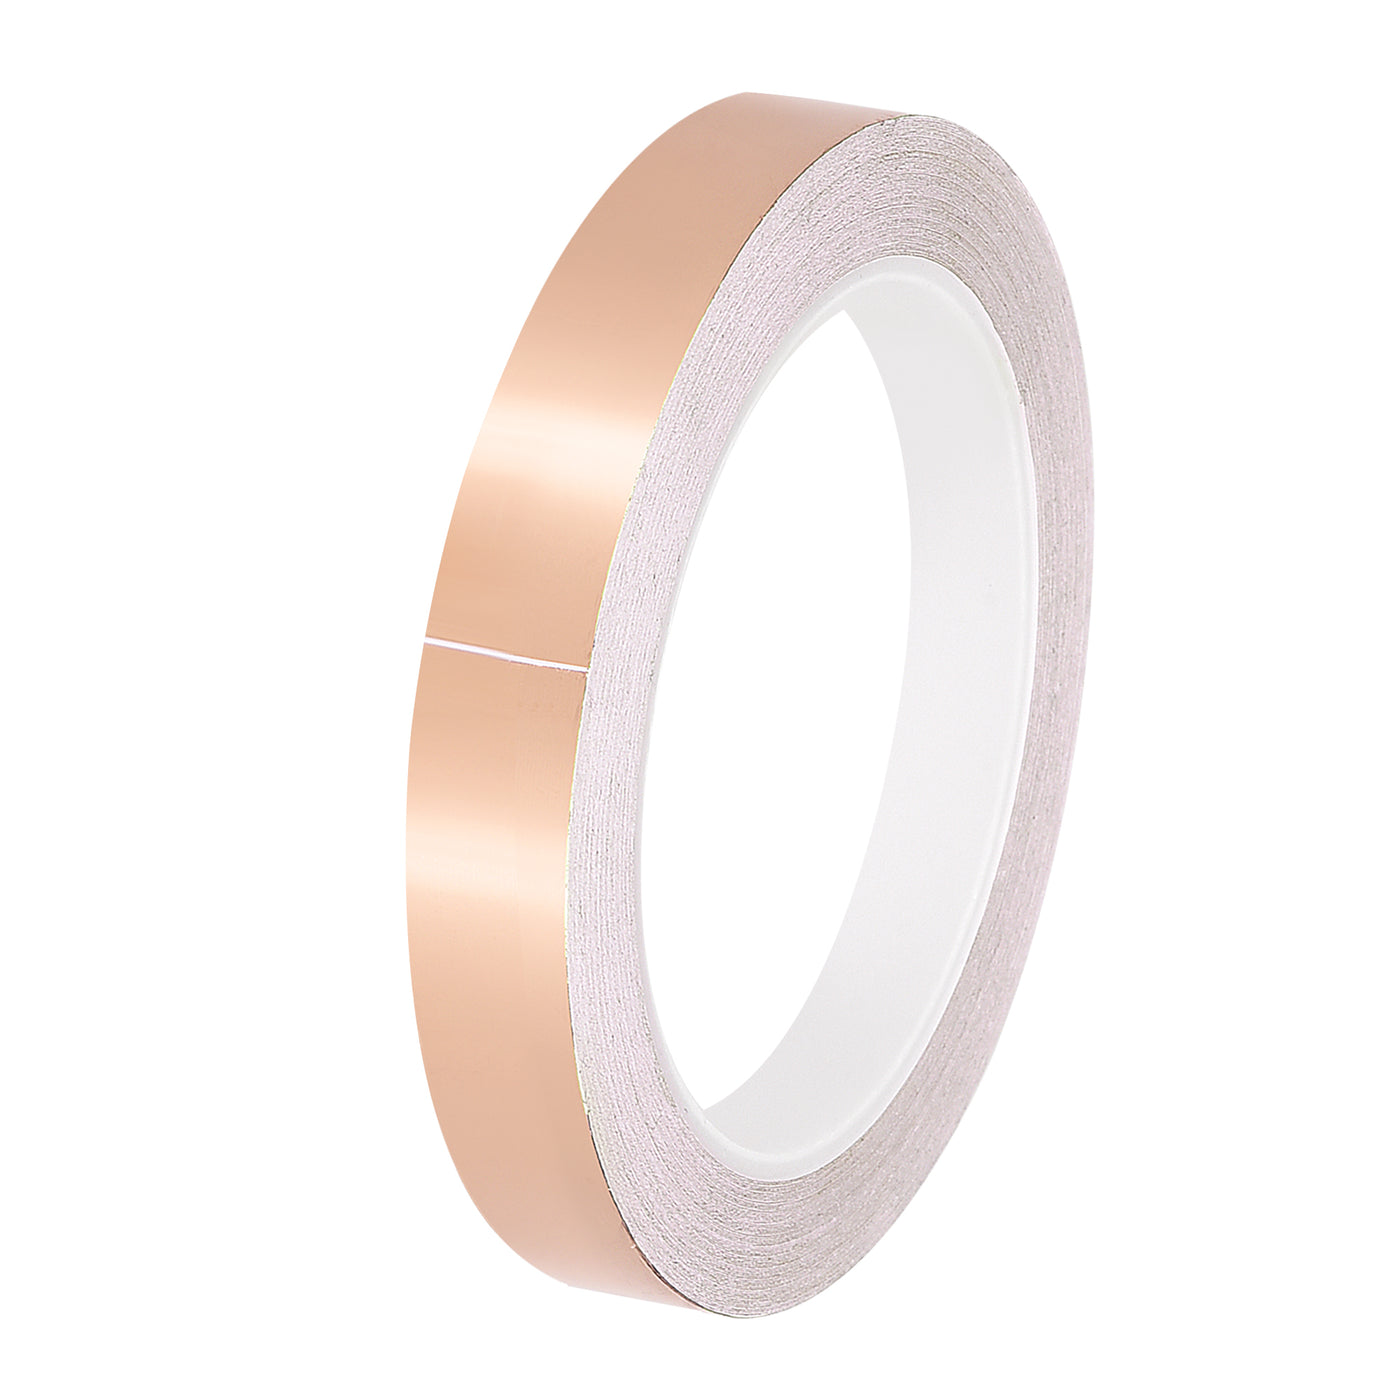 uxcell Uxcell Single-Sided Conductive Tape Copper Foil Tape 18mm x 20m/65.6ft for EMI Shielding 1pcs